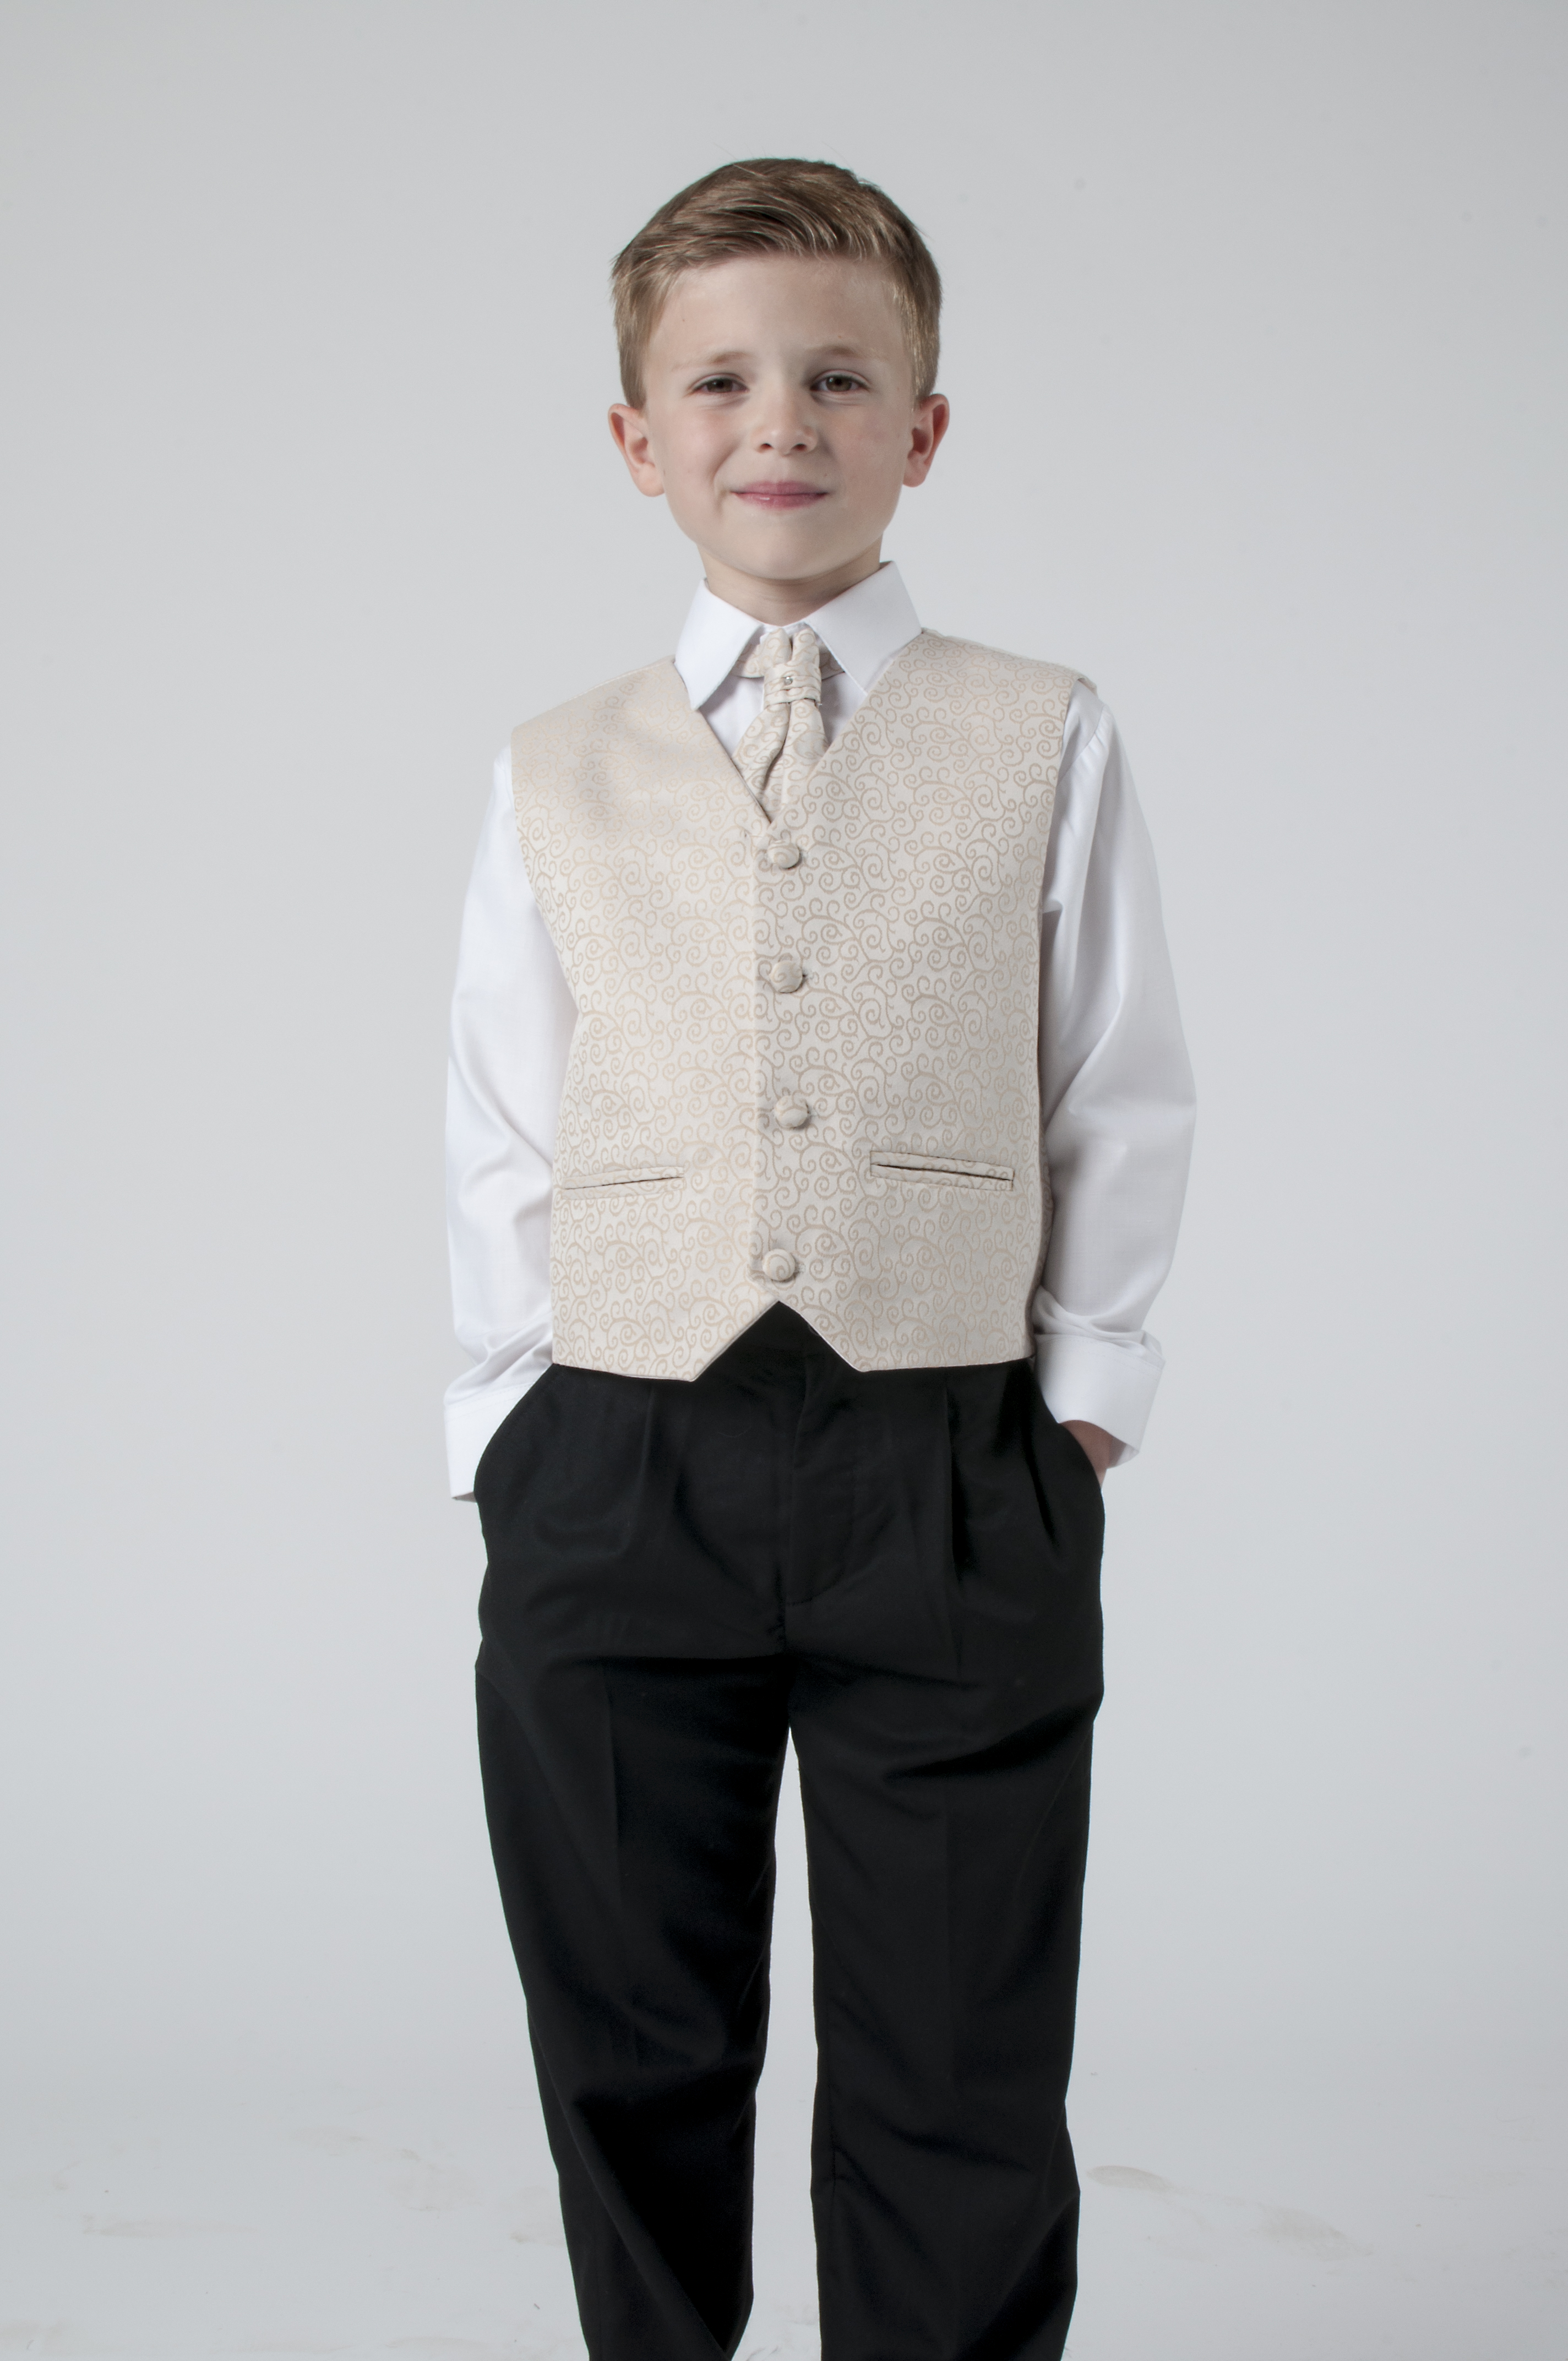 Boys Suits 4 Piece Champagne Waistcoat Suit Swirl Pageboy Party Formal Wedding 